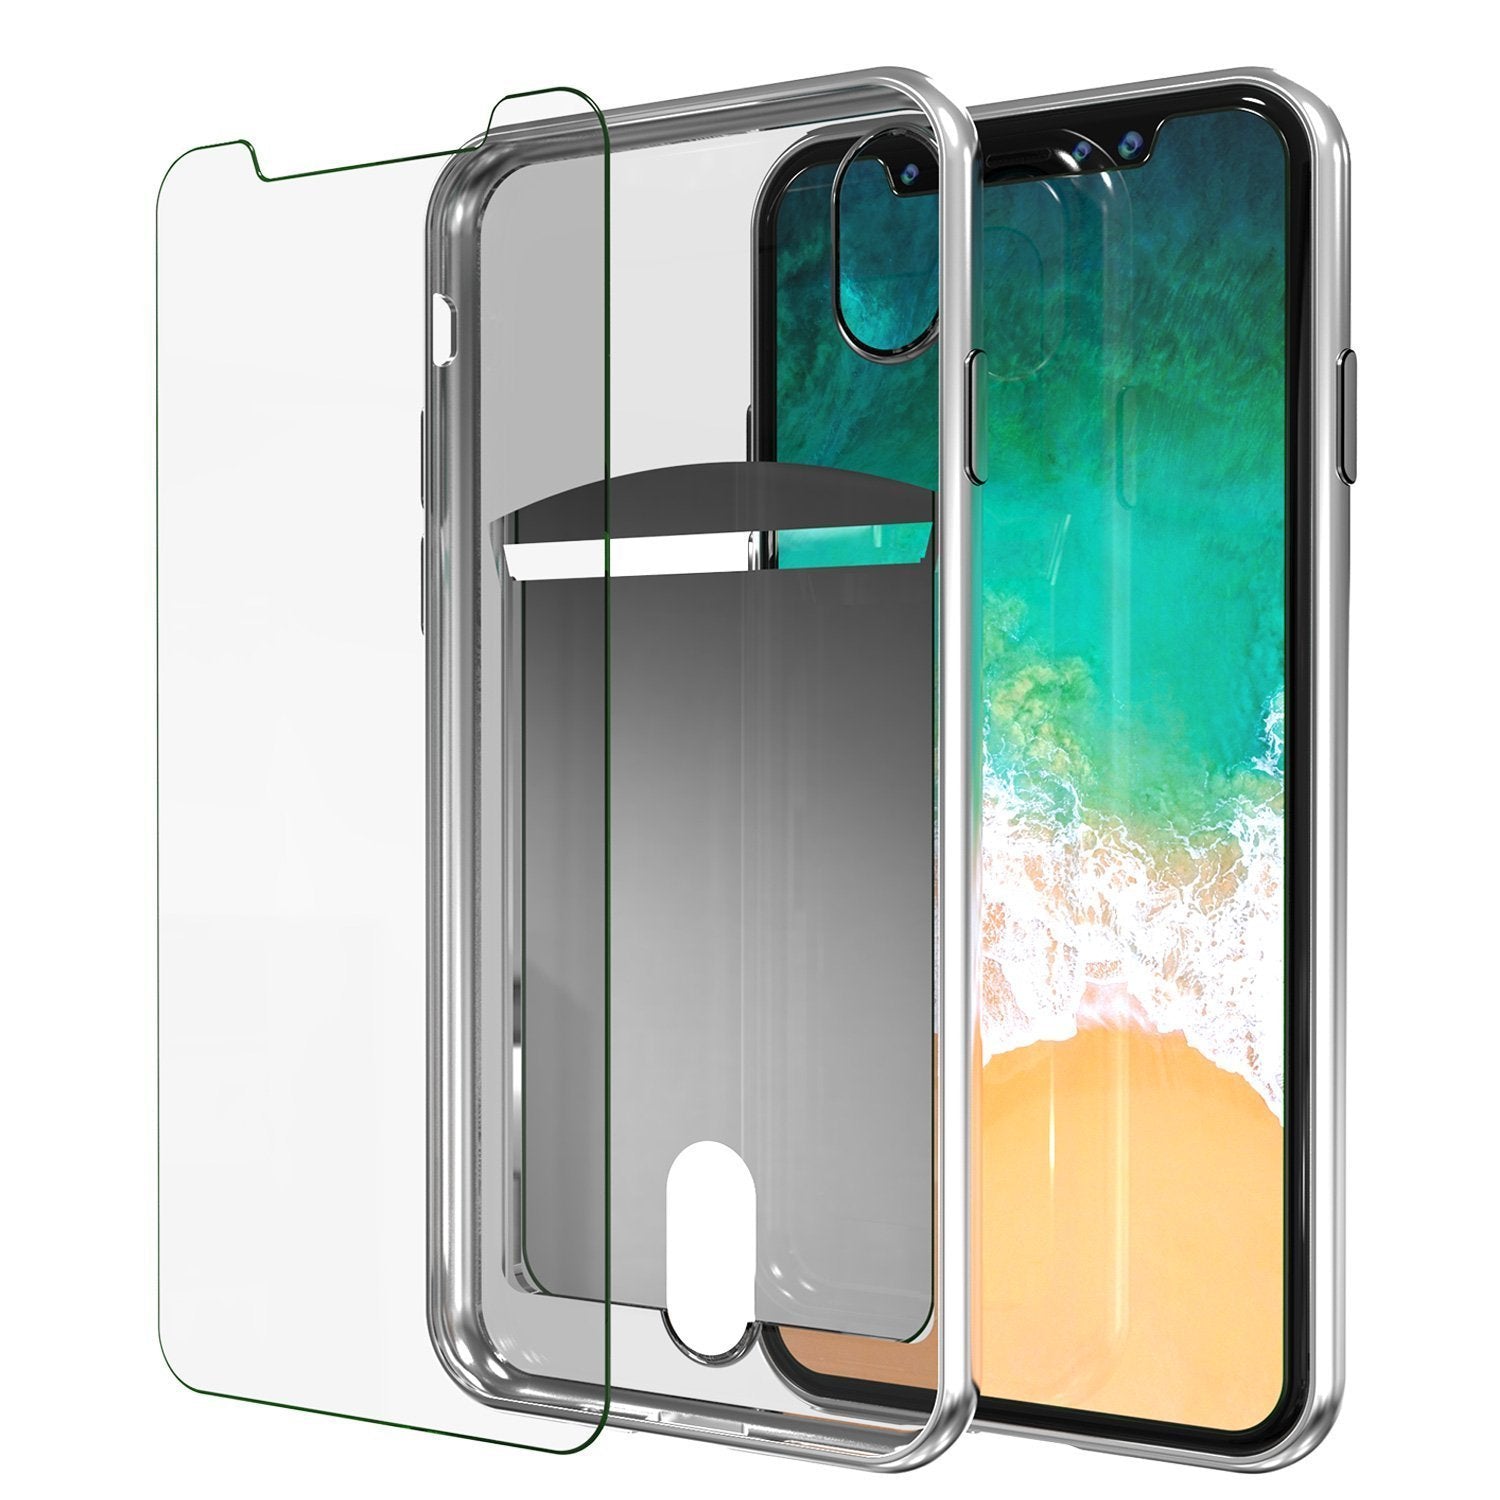 iPhone X Punkcase, LUCID Series Slim Fit Protective Dual Layer, Silver